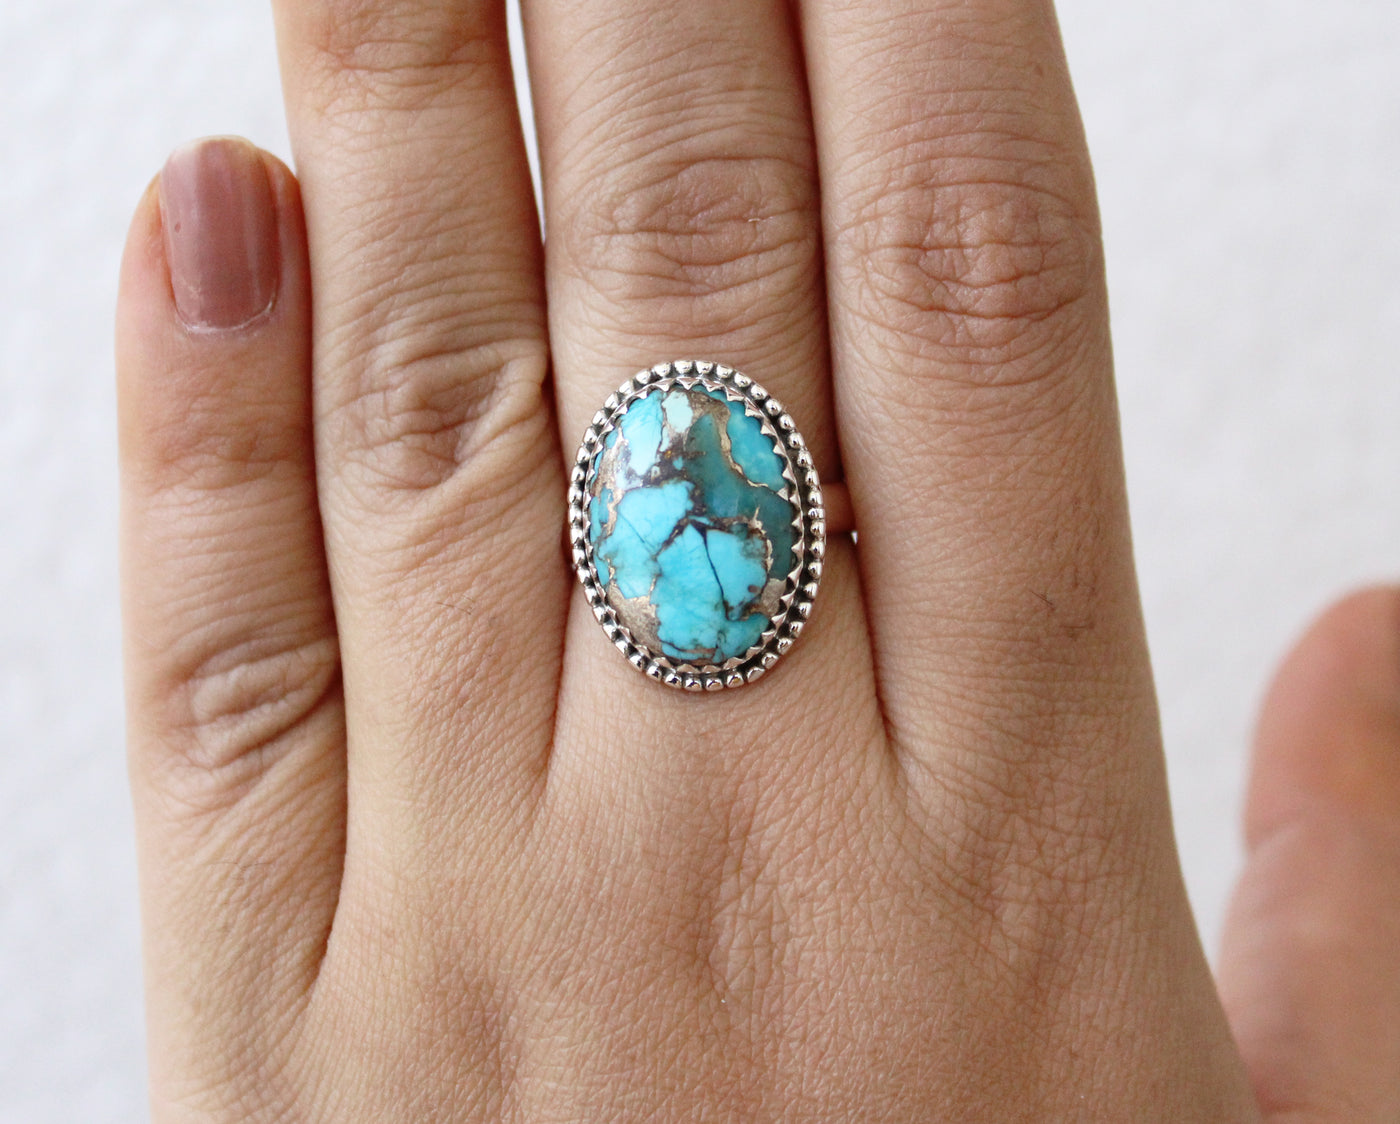 Turquoise Ring, 925 Sterling Silver Ring, Copper Turquoise Ring, Boho Ring, Statement Ring, Gemstone ring, Gift for Her